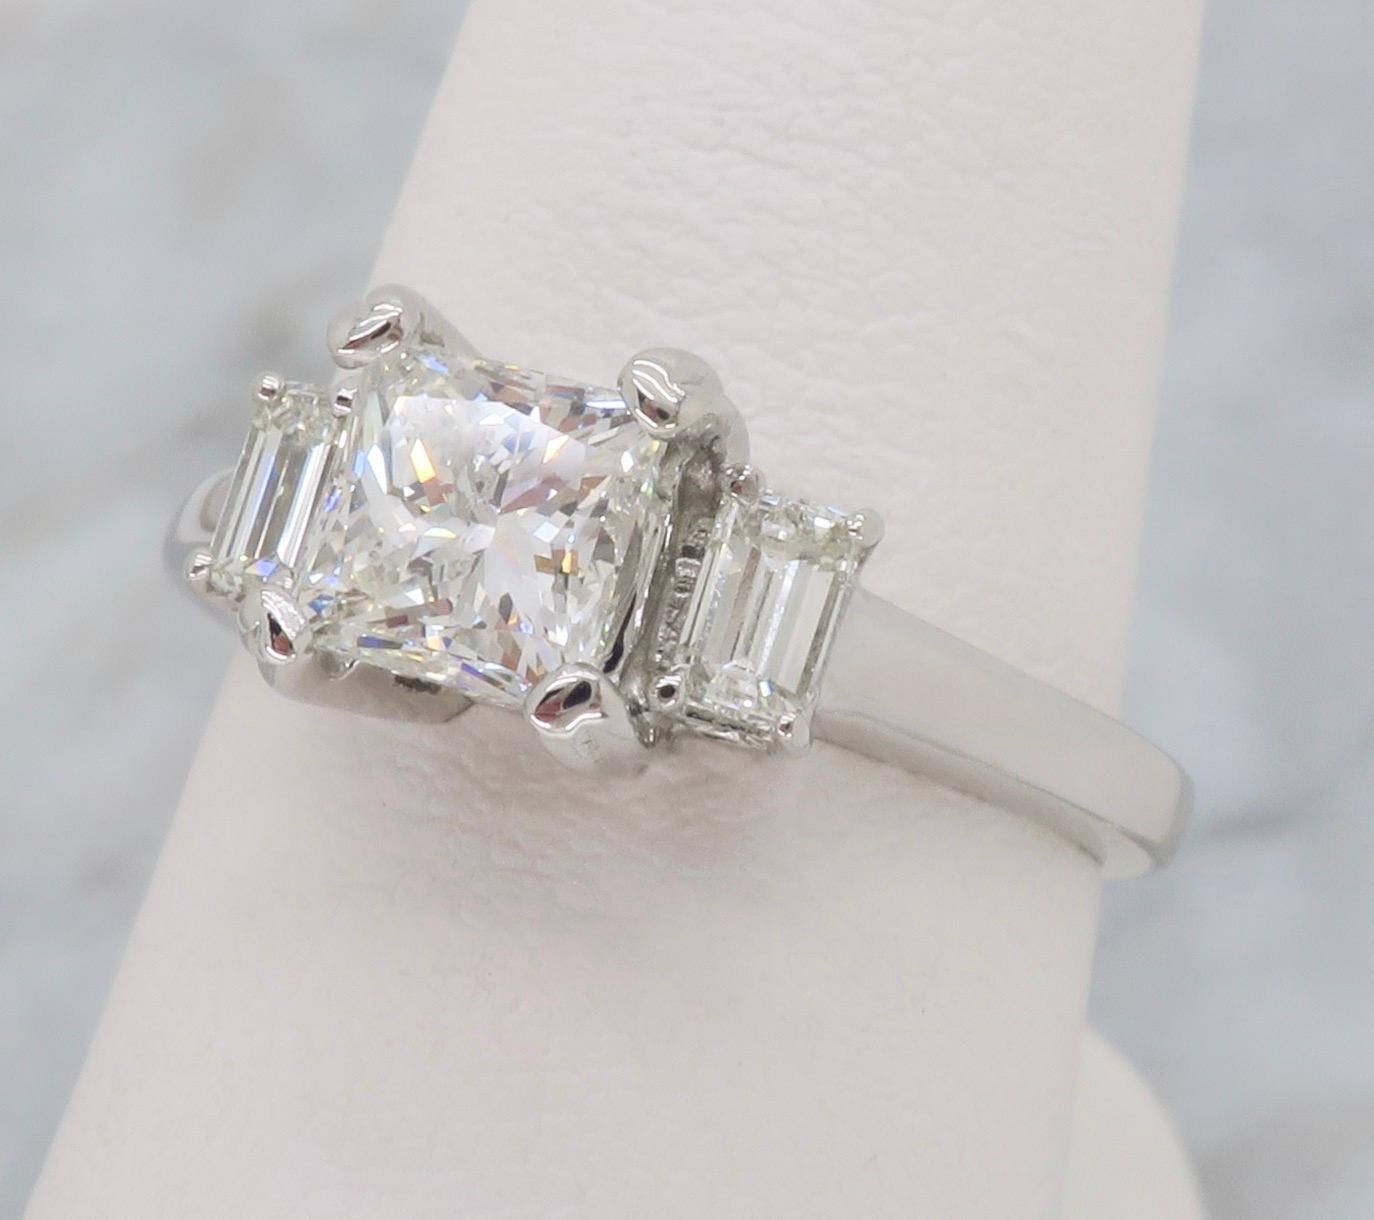 Classic three stone diamond engagement ring featuring a center Princess cut diamonds, flanked by two Emerald cut diamonds. 

Center Diamond Carat Weight: Approximately .90CT
Diamond Cut: Princess Cut
Total Diamond Carat Weight: Approximately